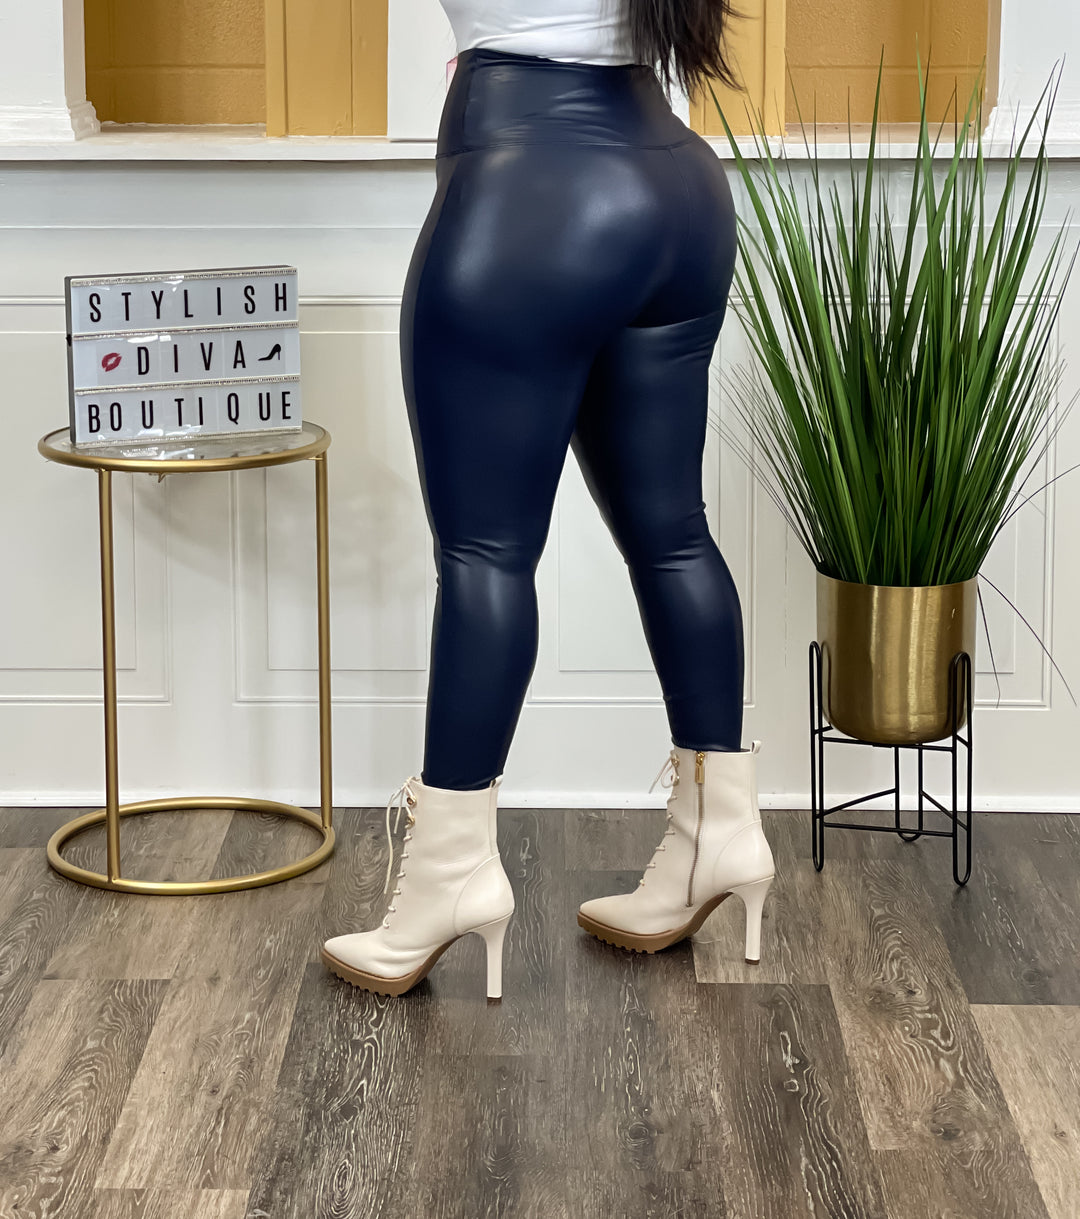 Texy's Fashion Boutique, Leather leggings vacay approved